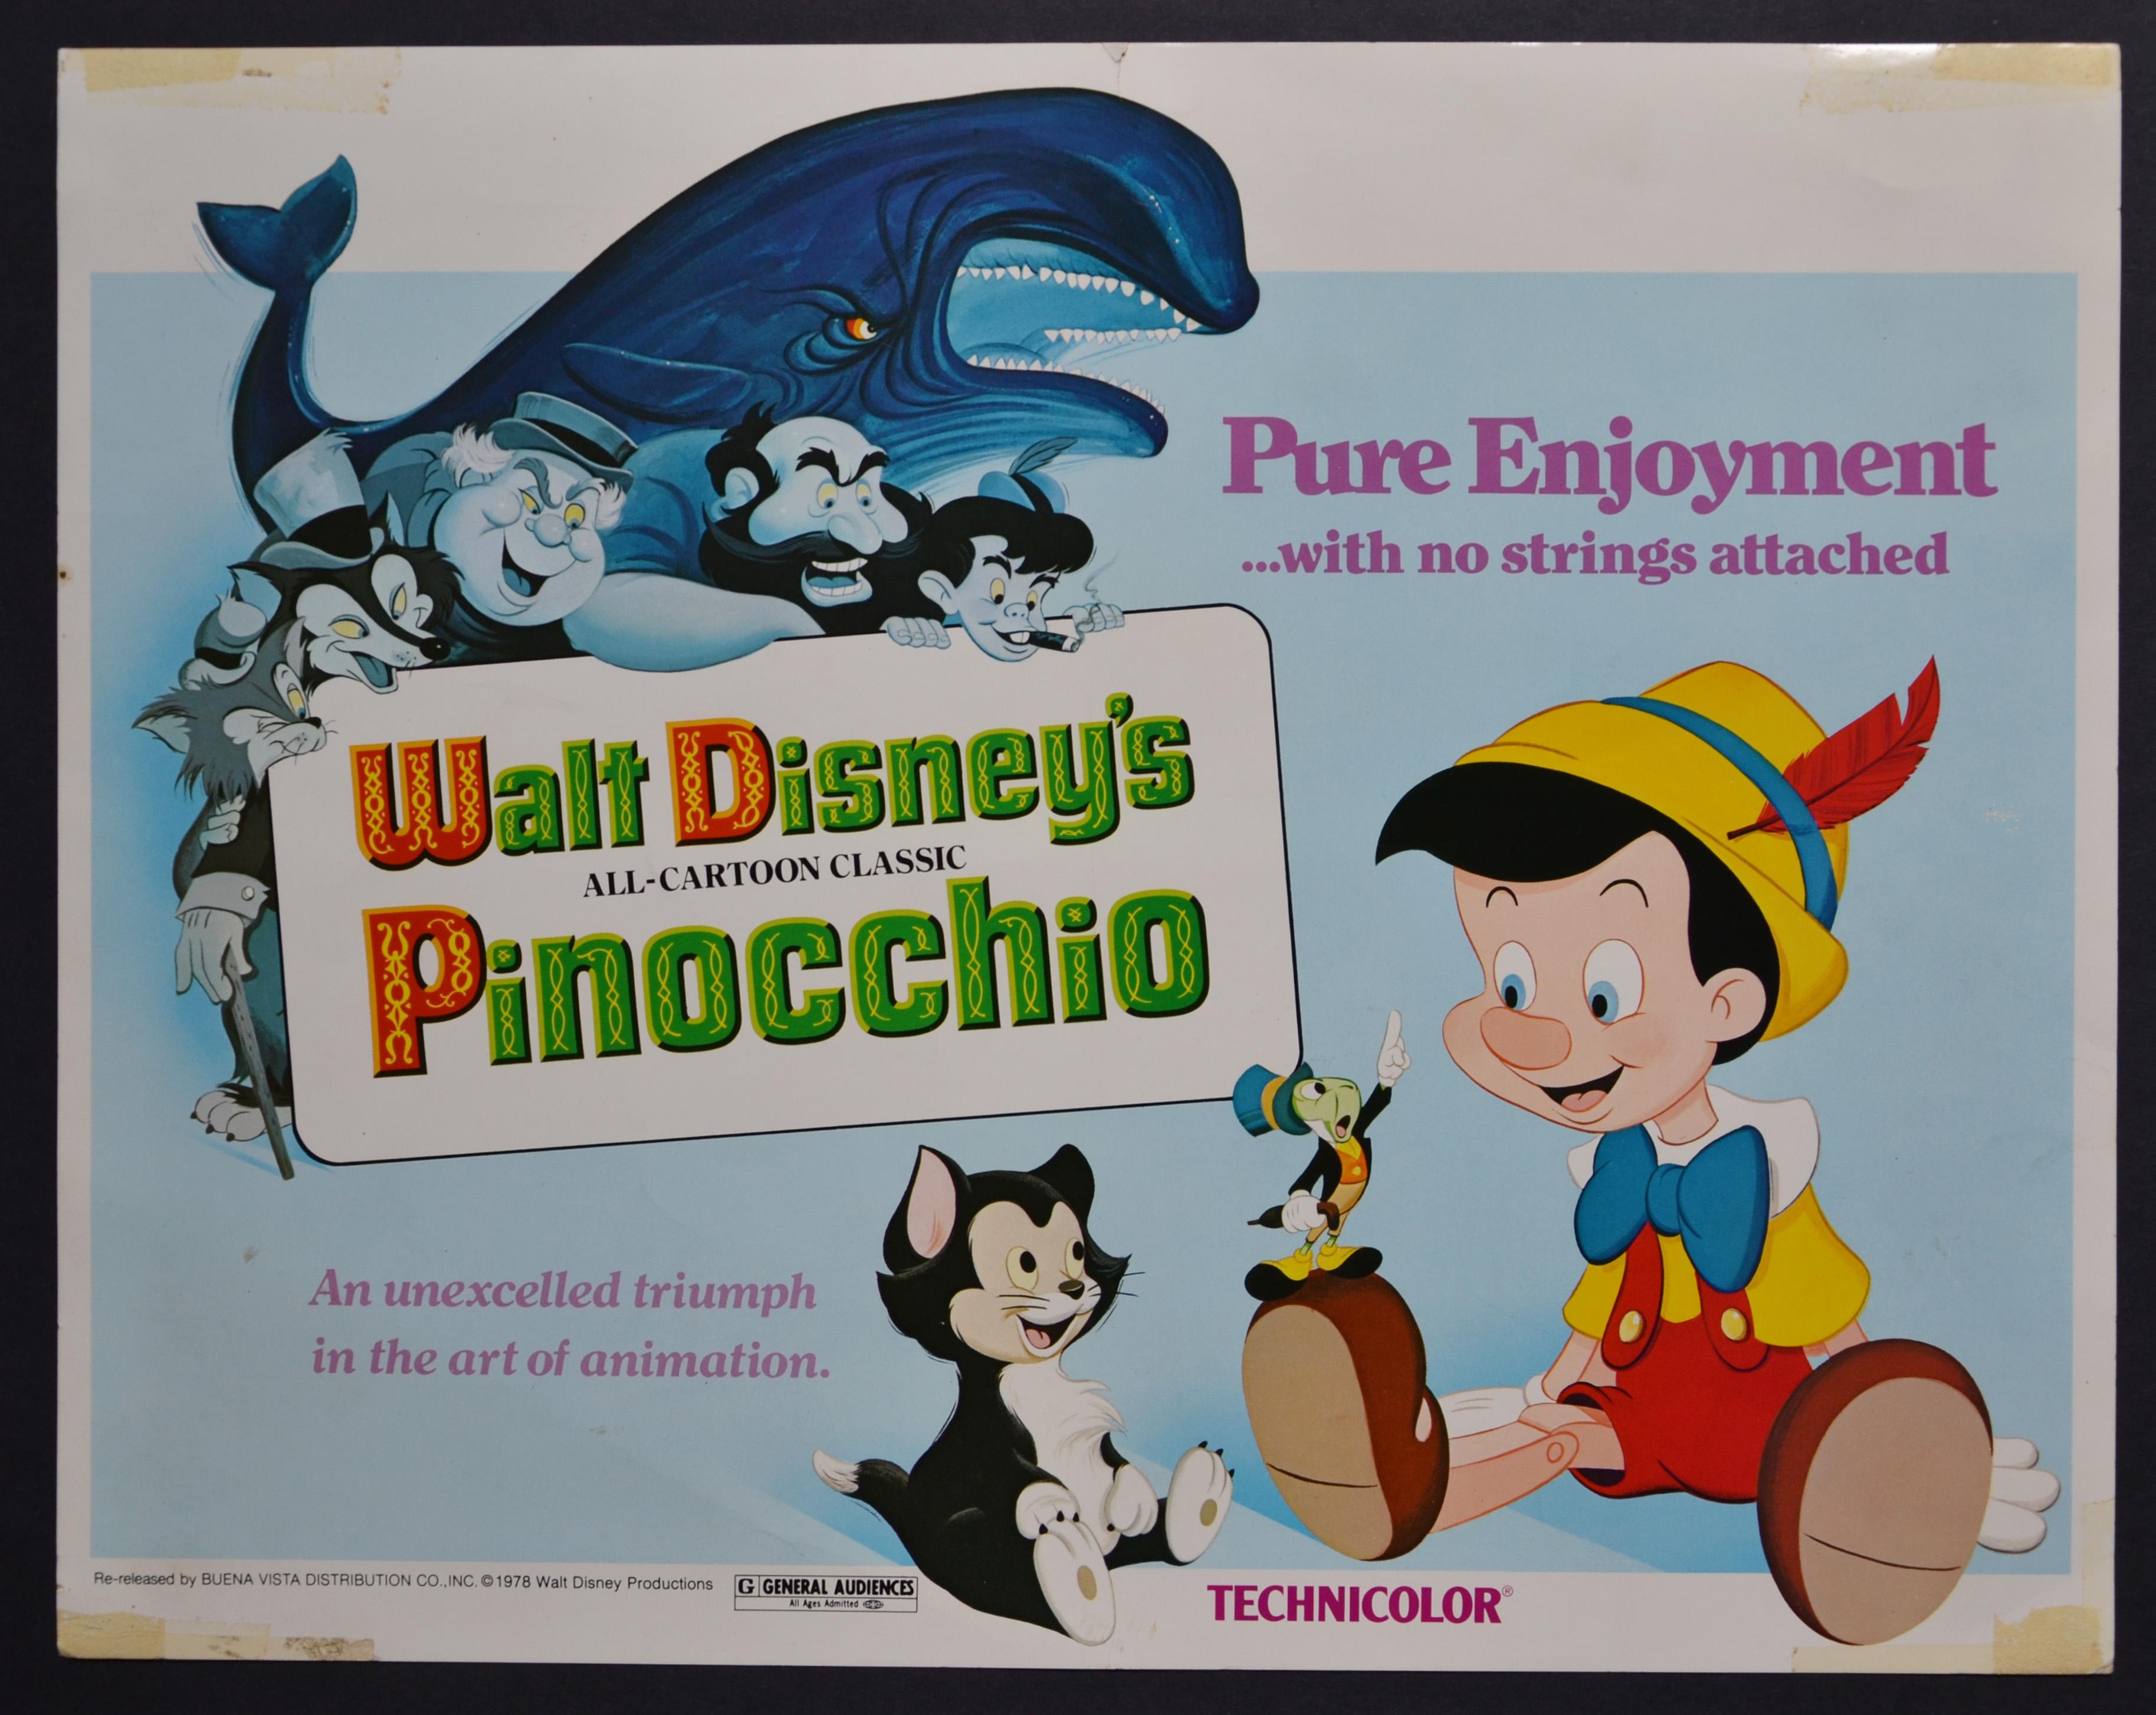 Unknown - „Pinocchio“ Original American Lobby Card of Walt Disney's Movie, USA 1940. For Sale at 1stDibs